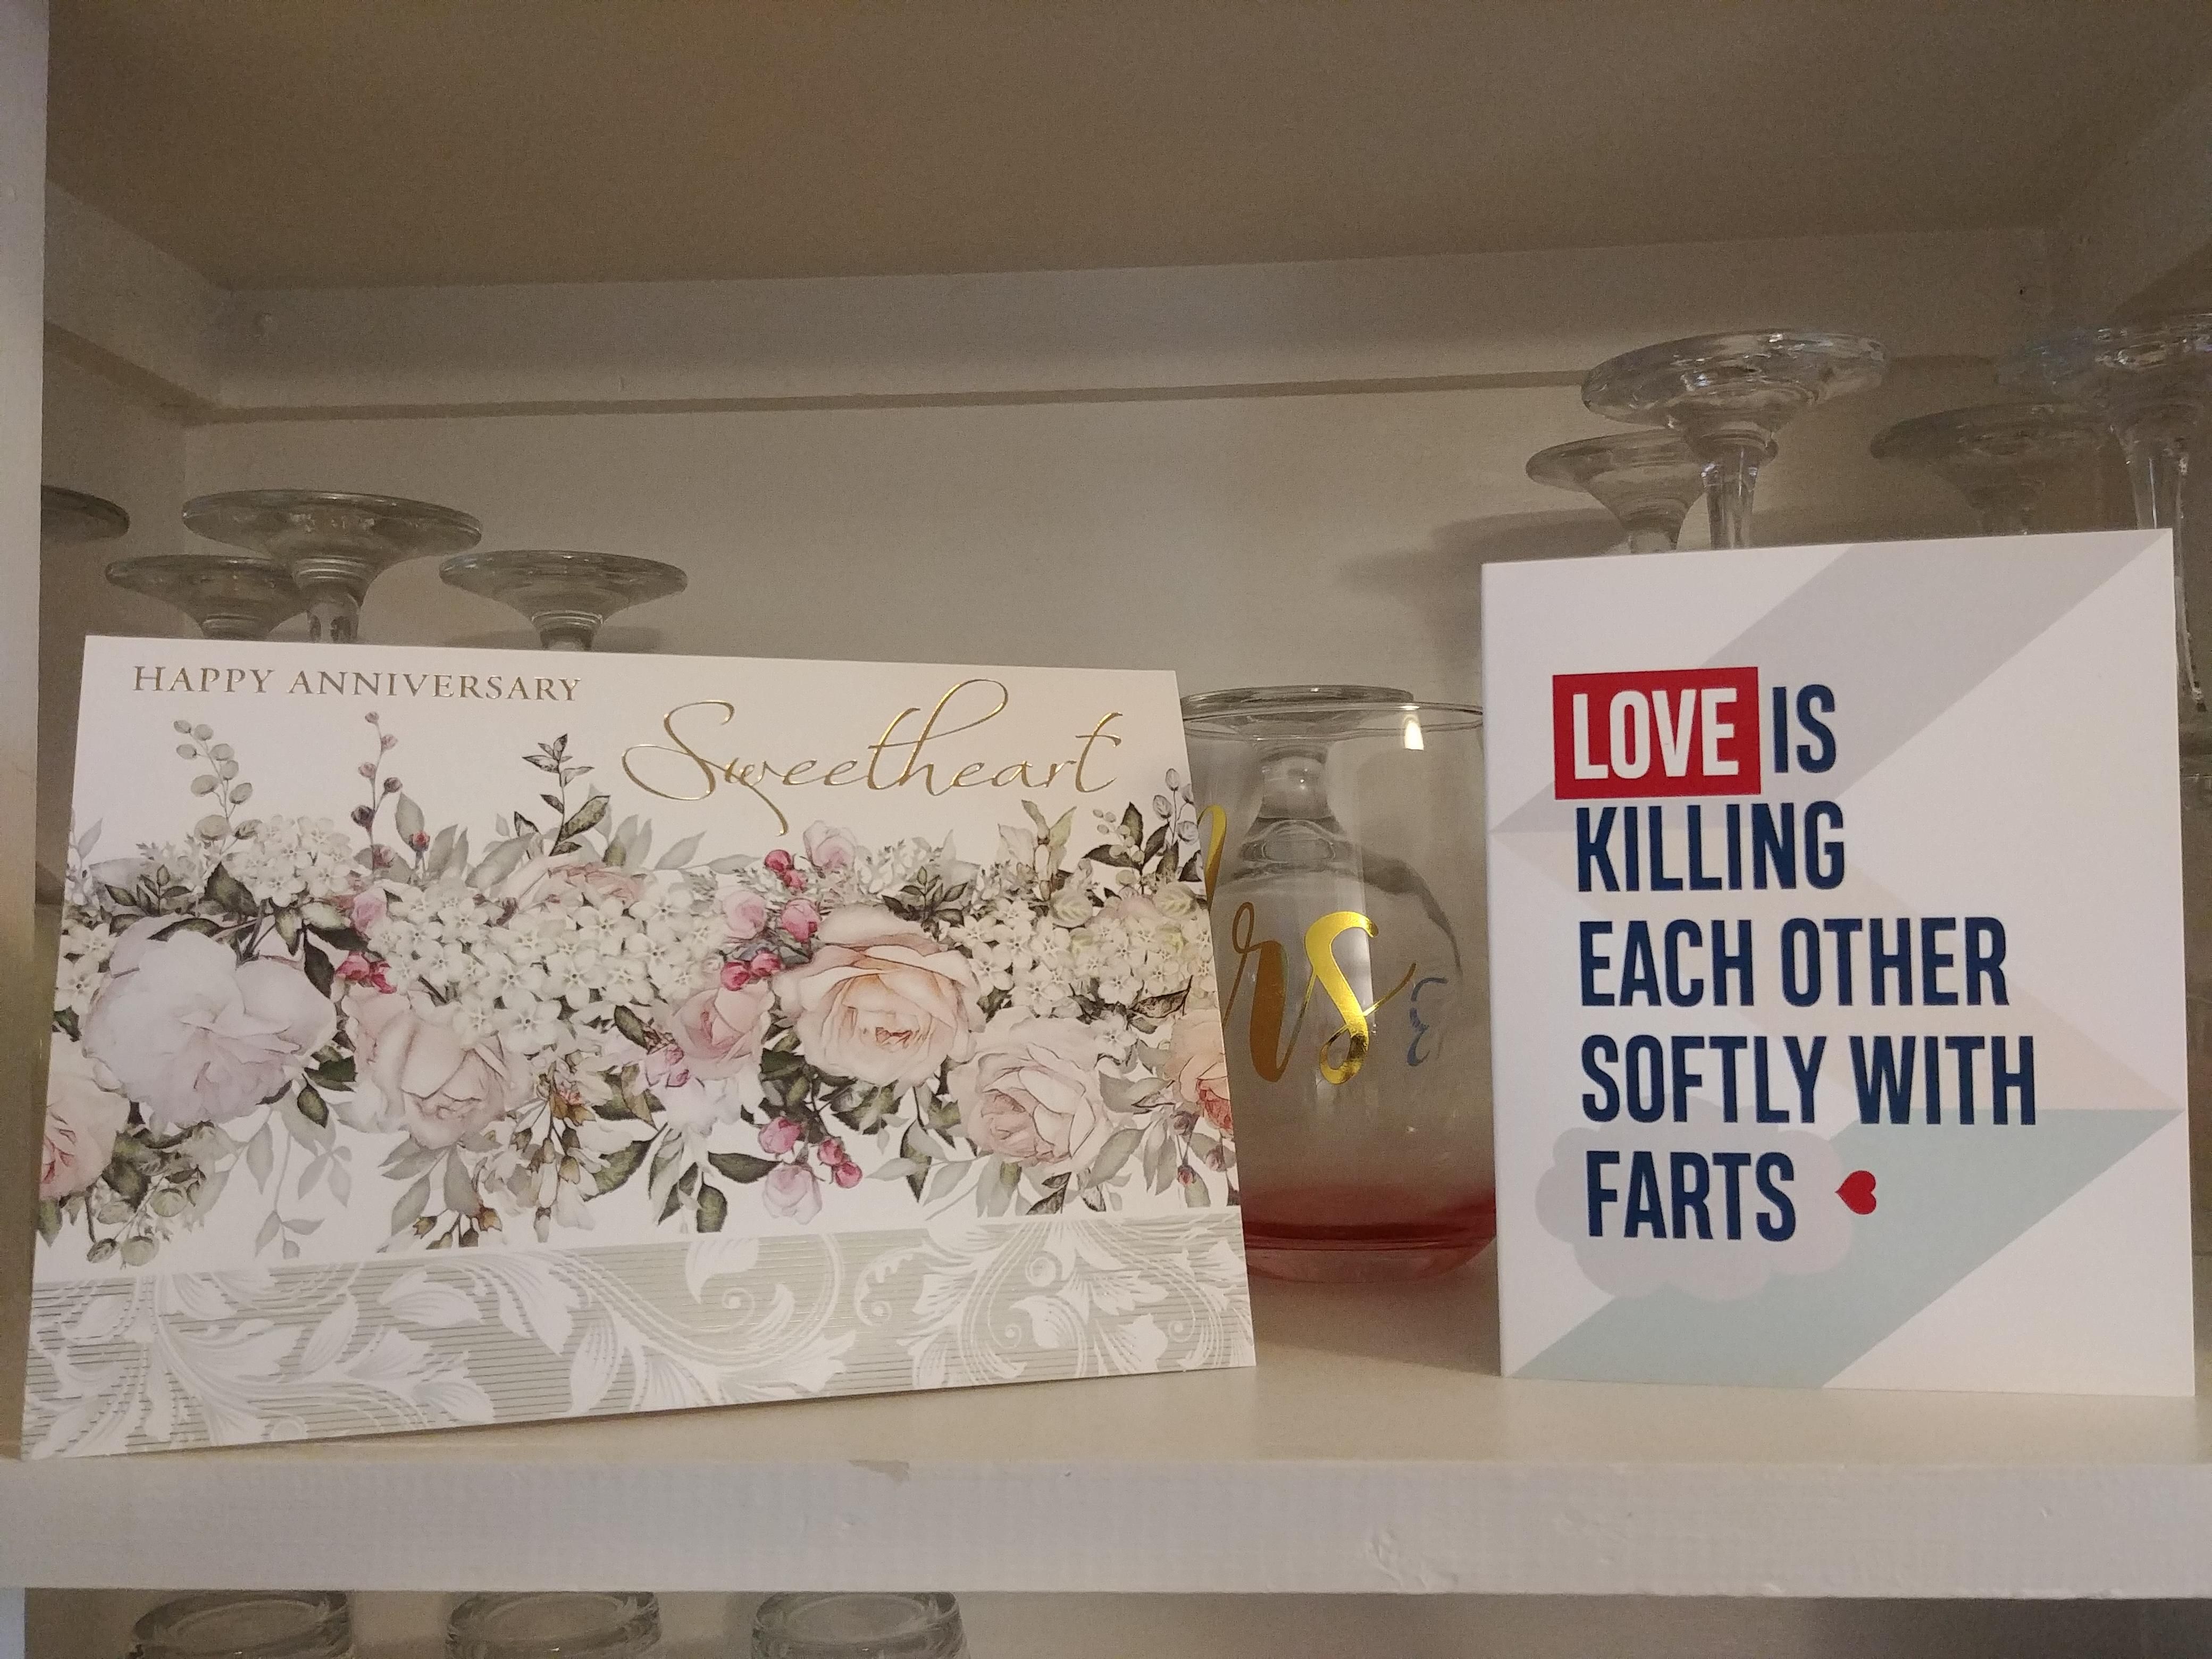 My husband and I went with a different card approach on our anniversary...